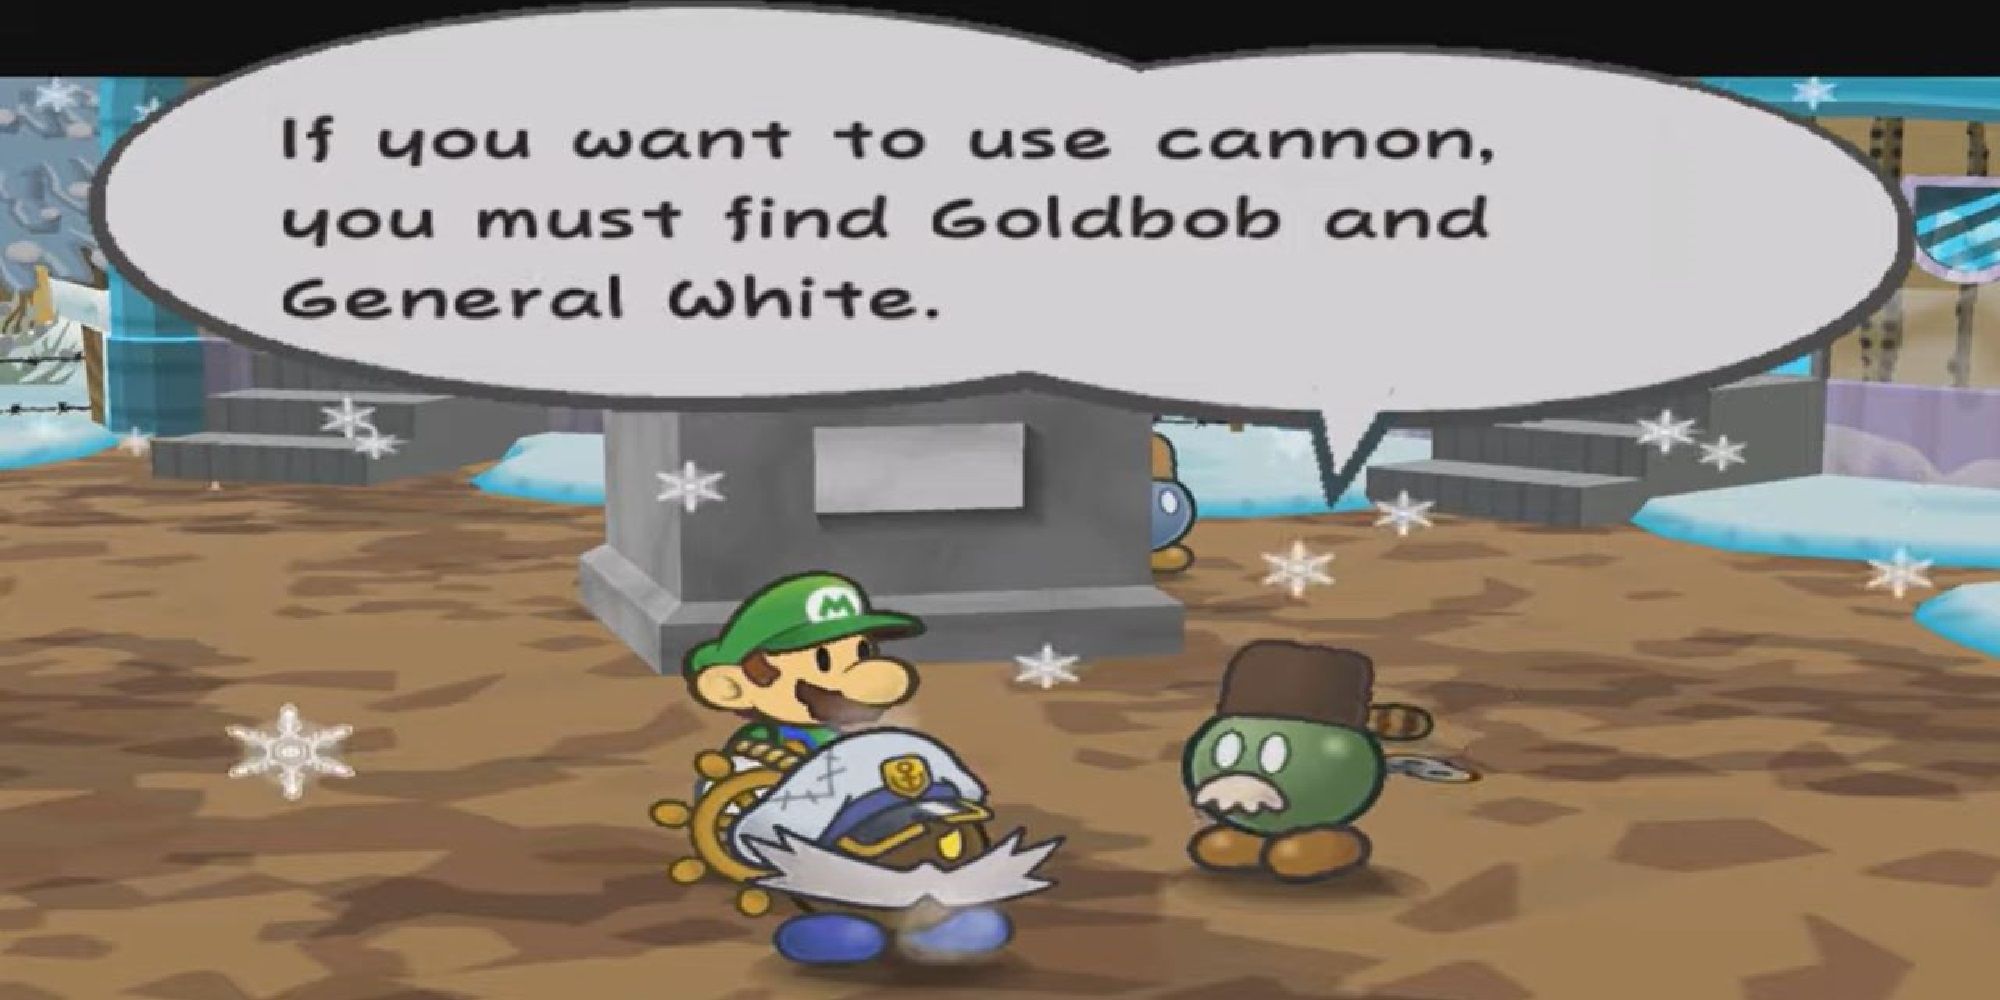 Admiral Bobbery talks with another Bob-omb at fahr outpost about how they need to find two missing people.